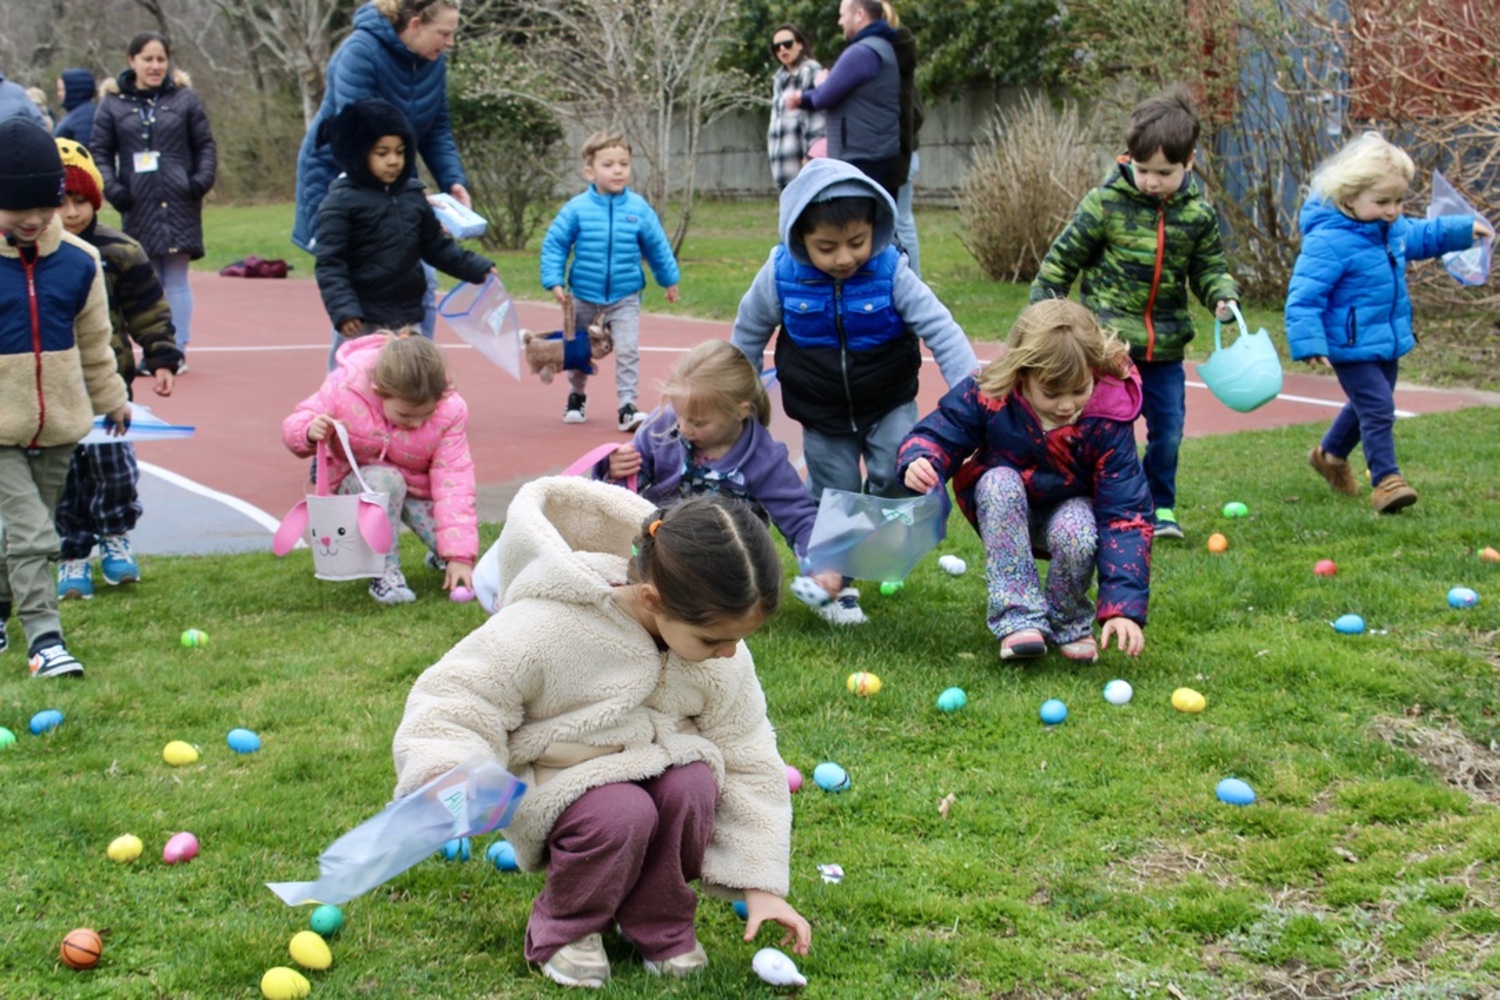 The Bridgehampton School District pre-k to fifth grade students celebrated the start of spring scrambling to find 2,000 eggs donated by students, parents and community members and spread across the school grounds. Hamra Ozsu,  with the help of the elementary school student government, organized the event, which was divided into age groups.  In an effort to reduce waste, the student who brings back the most eggs the following year will receive a prize.  COURTESY BRIDGEHAMPTON SCHOOL DISTRICT